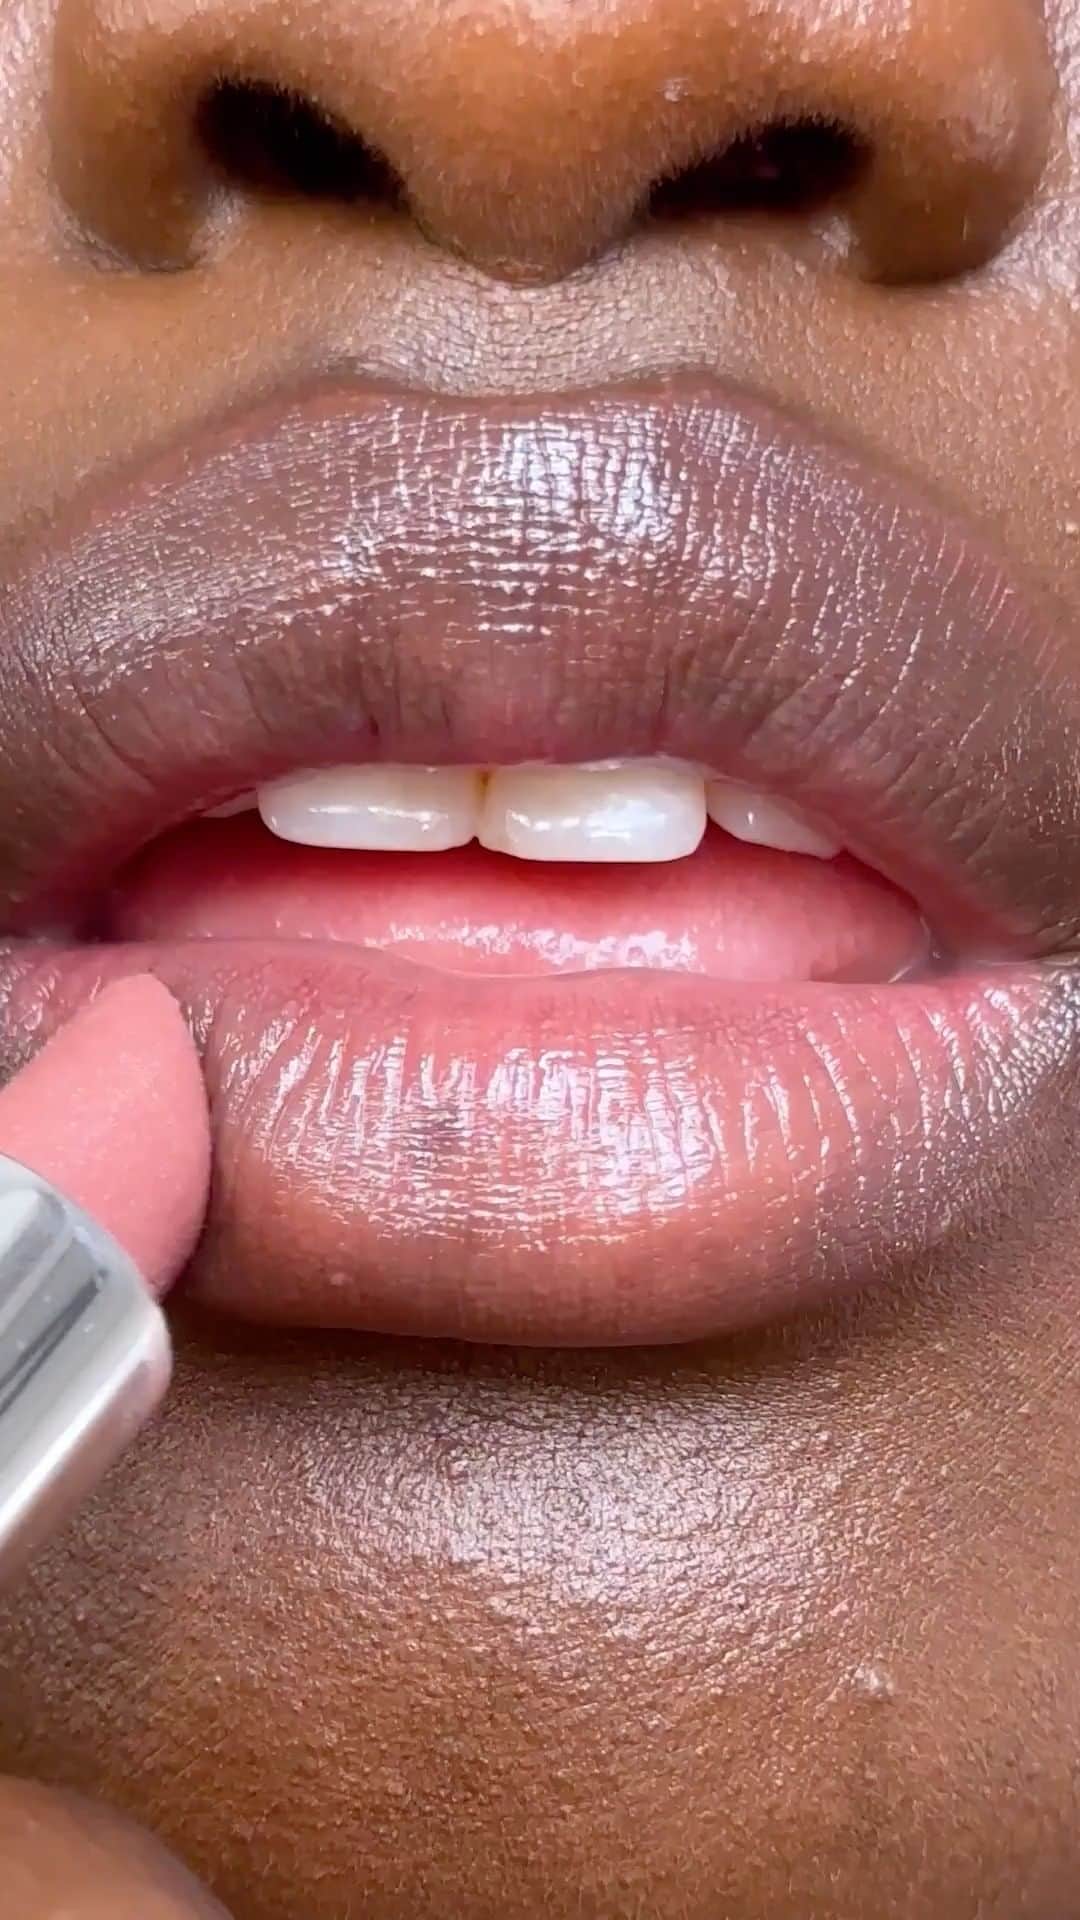 M·A·C Cosmetics UK & Irelandのインスタグラム：「Them: I LOVE your lipstick, what is that? 👀 Us: Thanks, It’s M·A·C   Formulated with Hyaluronic Acid and Shea Butter to nourish your lips and your ego after all the compliments you’ll be getting 😏  Shop in-store now!  #MACCosmeticsUK #MACLipstick #ThanksItsMAC」